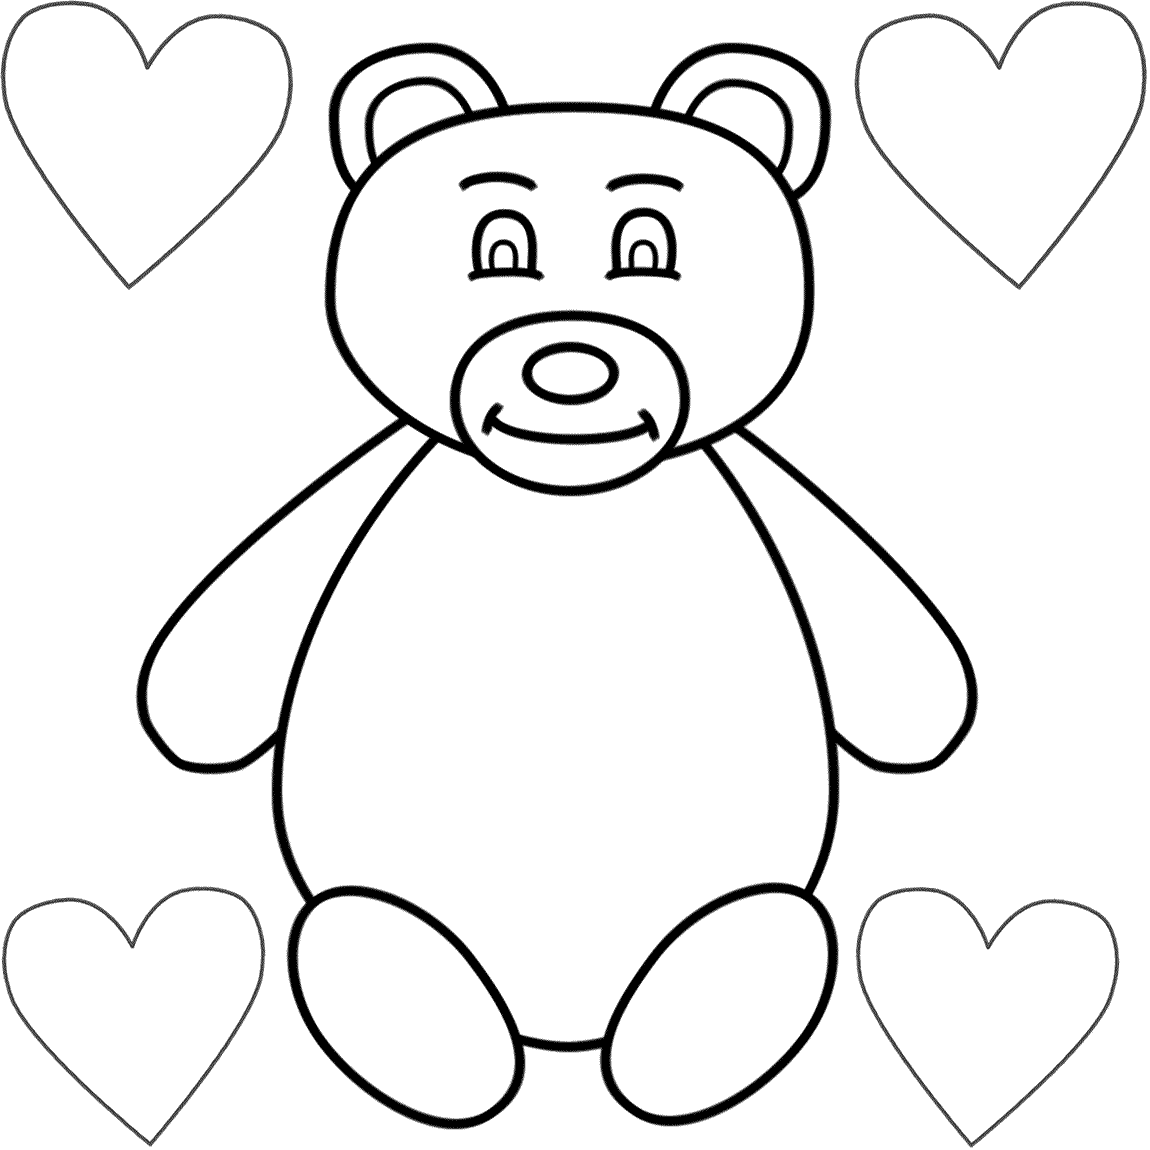 Teddy Bear With Heart Coloring Pages at GetColorings.com | Free ...